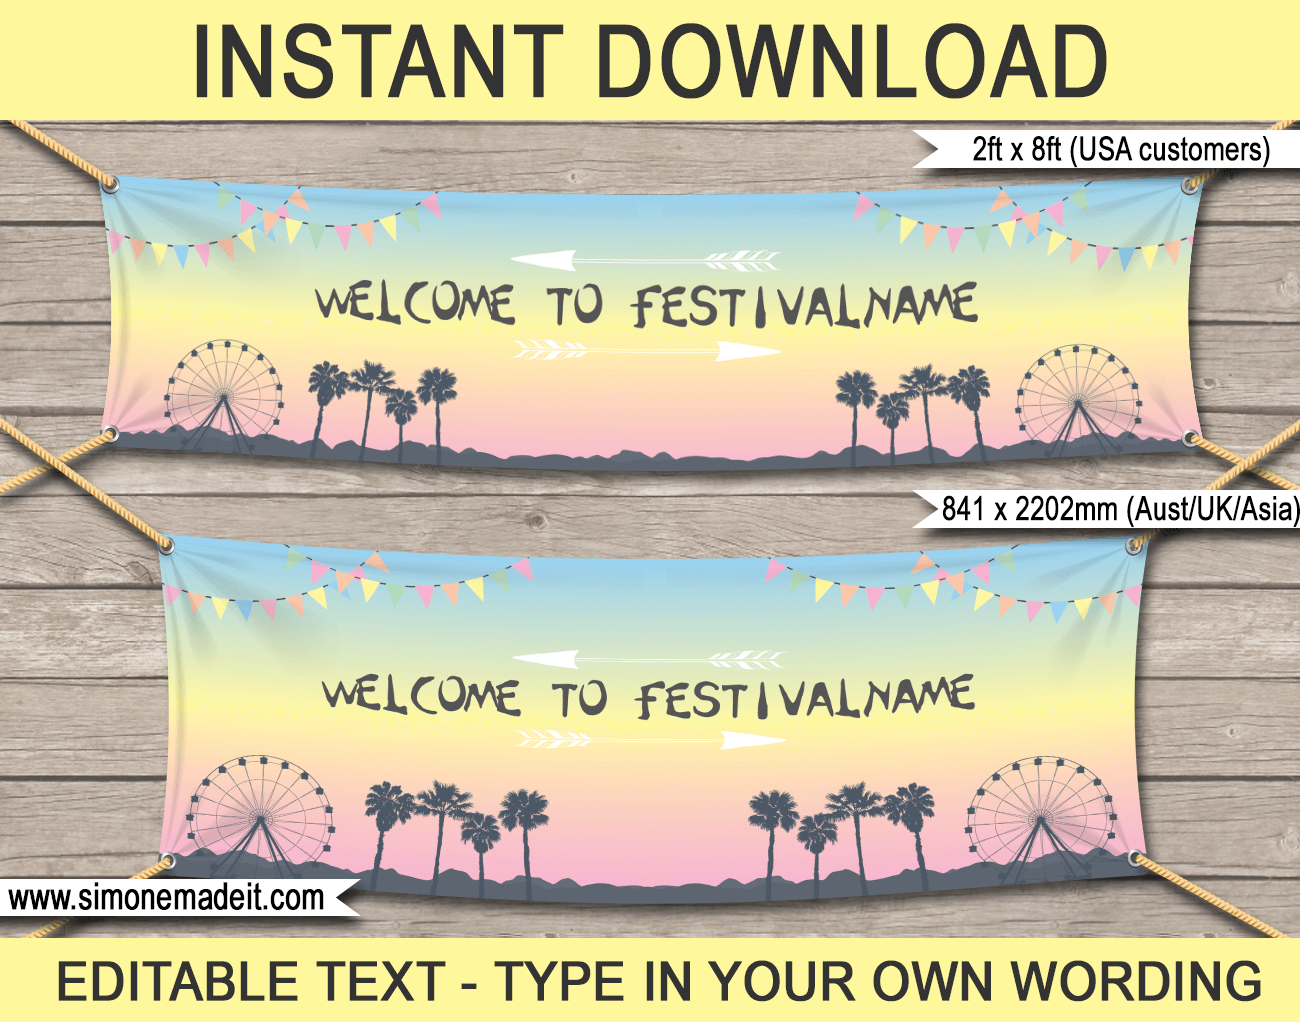 Printable Festival Theme Welcome Banner | Large Size | Outdoor Sign | Festival Party Decorations | Birthday Party | Kidchella, Festival, Fete, Gala, Fair, Carnival | Editable DIY Template | INSTANT DOWNLOAD via SIMONEmadeit.com